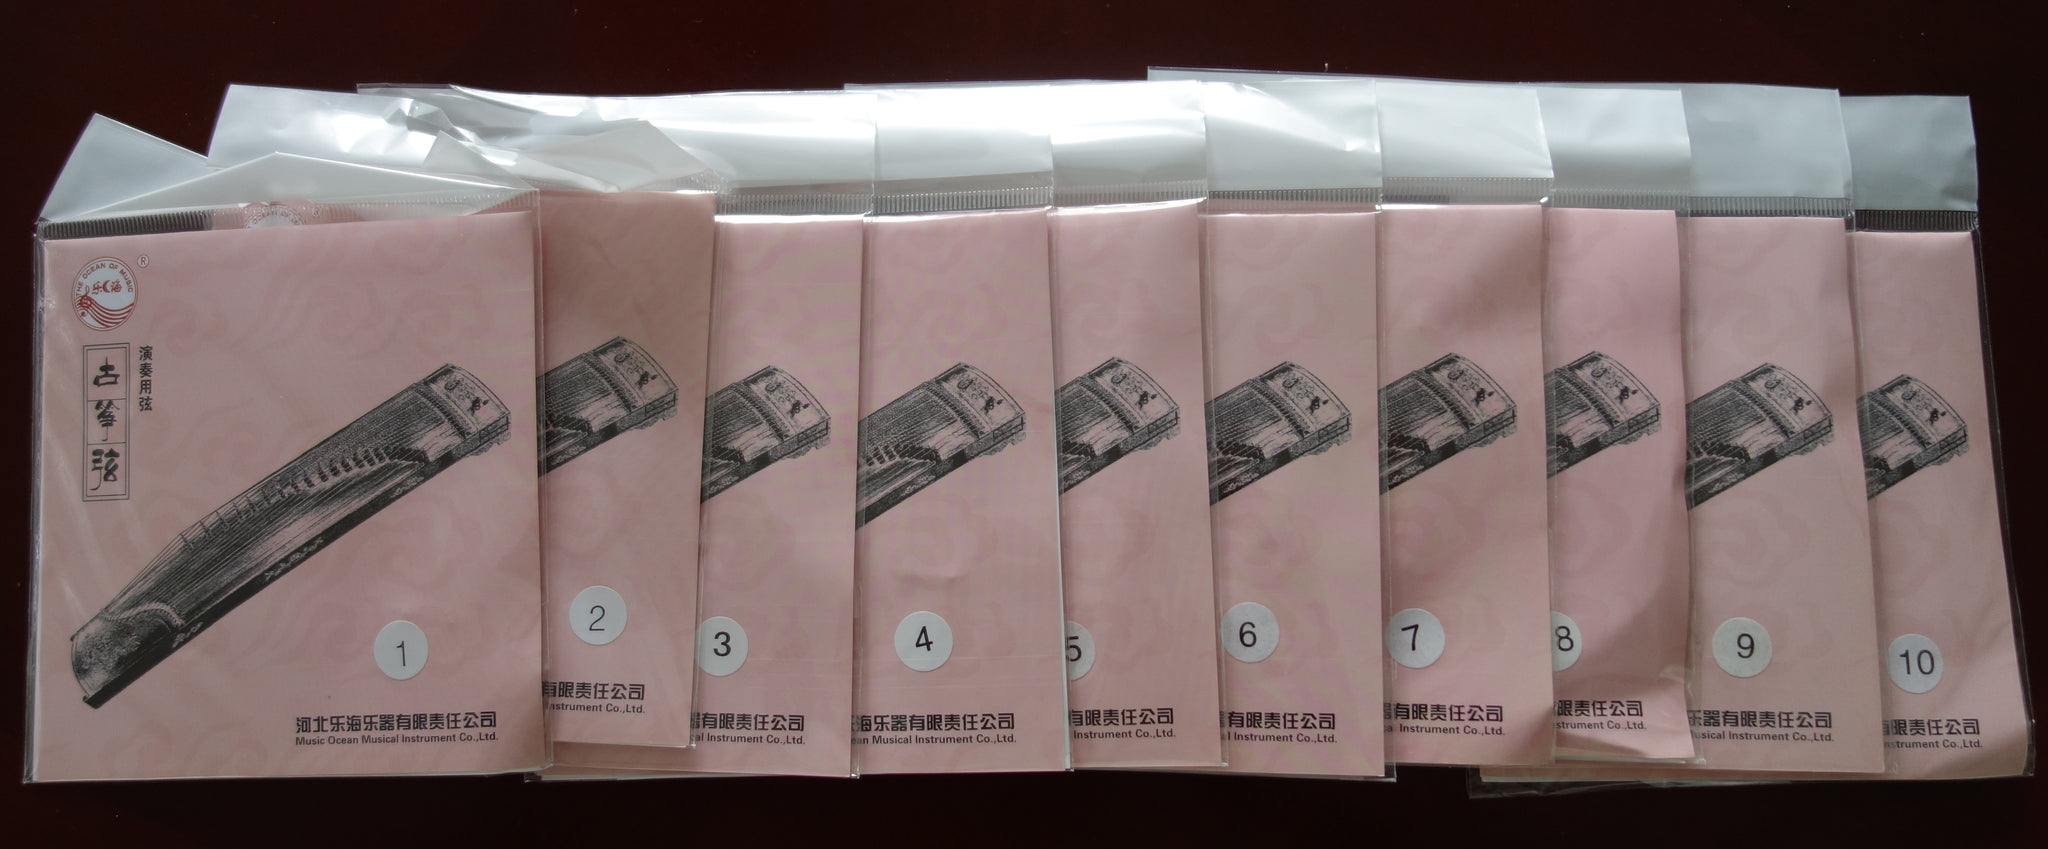 Strings for guzheng, high end concert grade, #1-10 高档演奏级古筝弦Free shipping